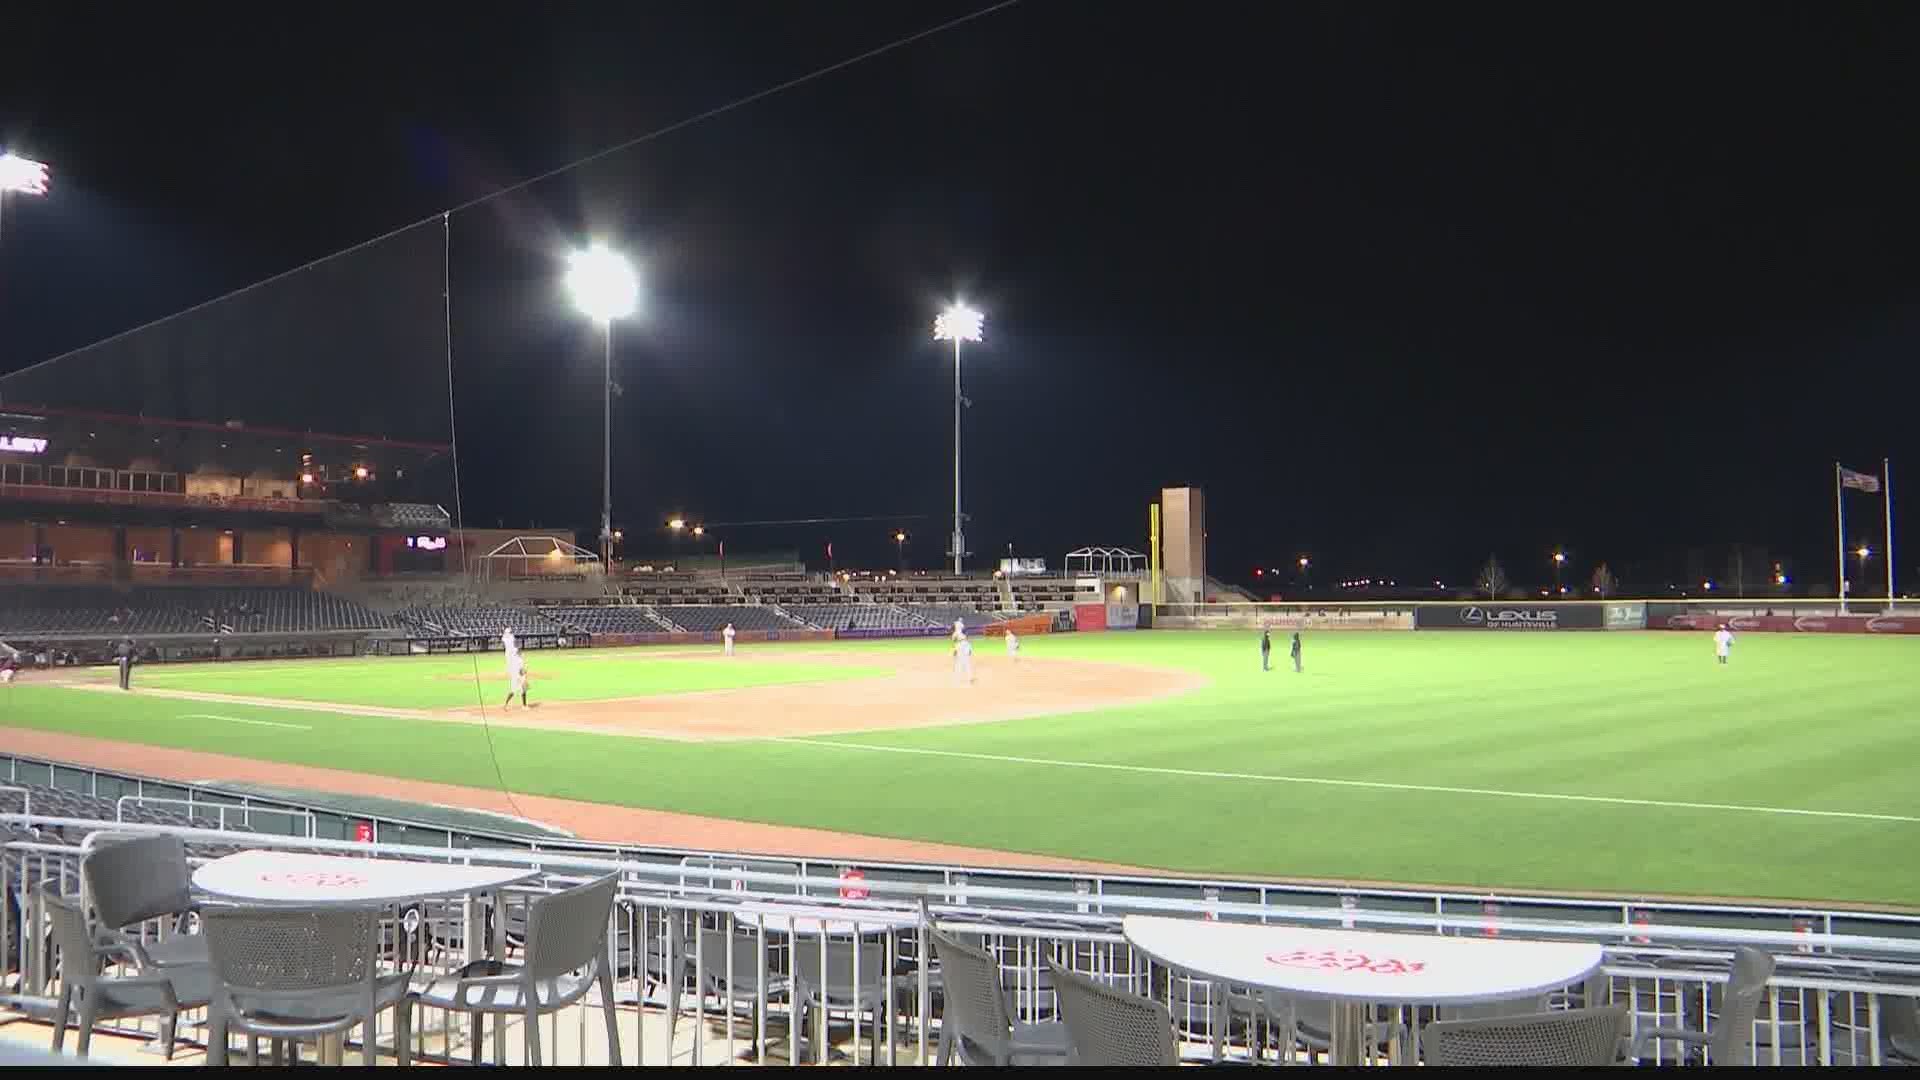 The SWAC Baseball Championships will be relocated to Toyota Field this year starting May 19th.